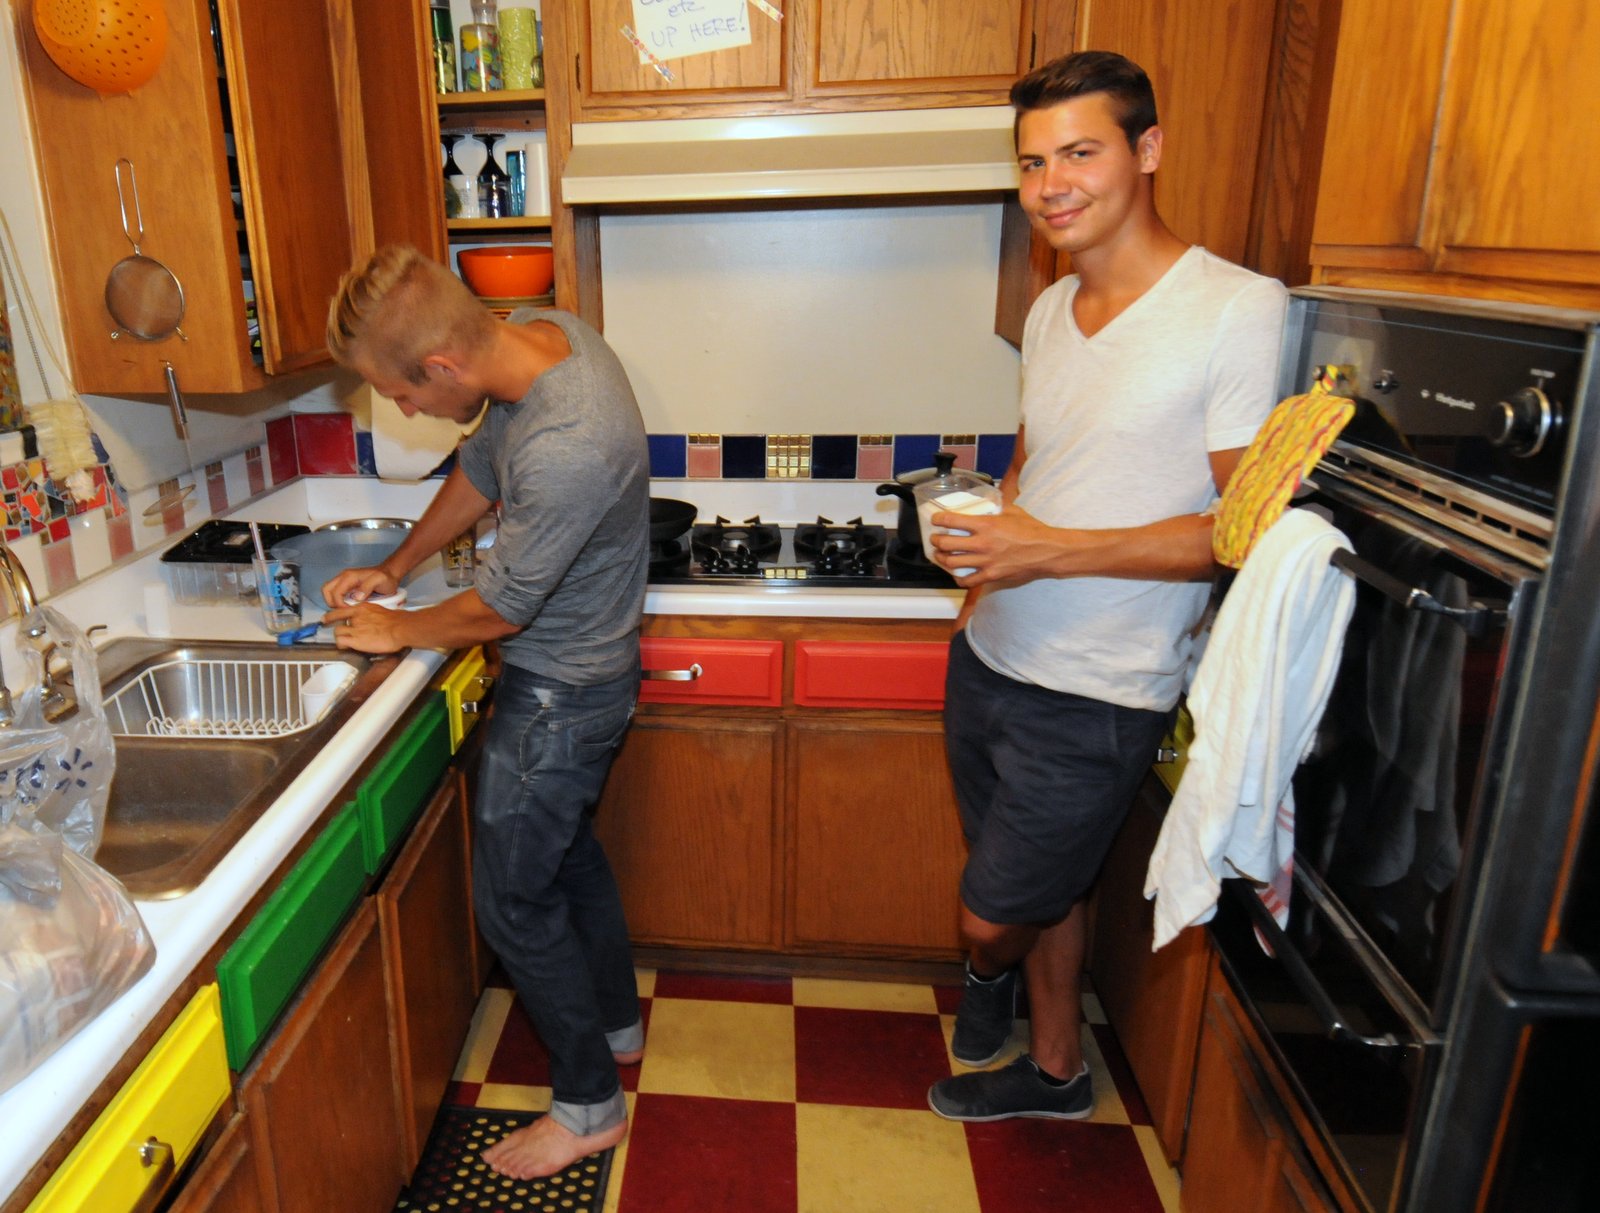 2 people in a tiny kitchen